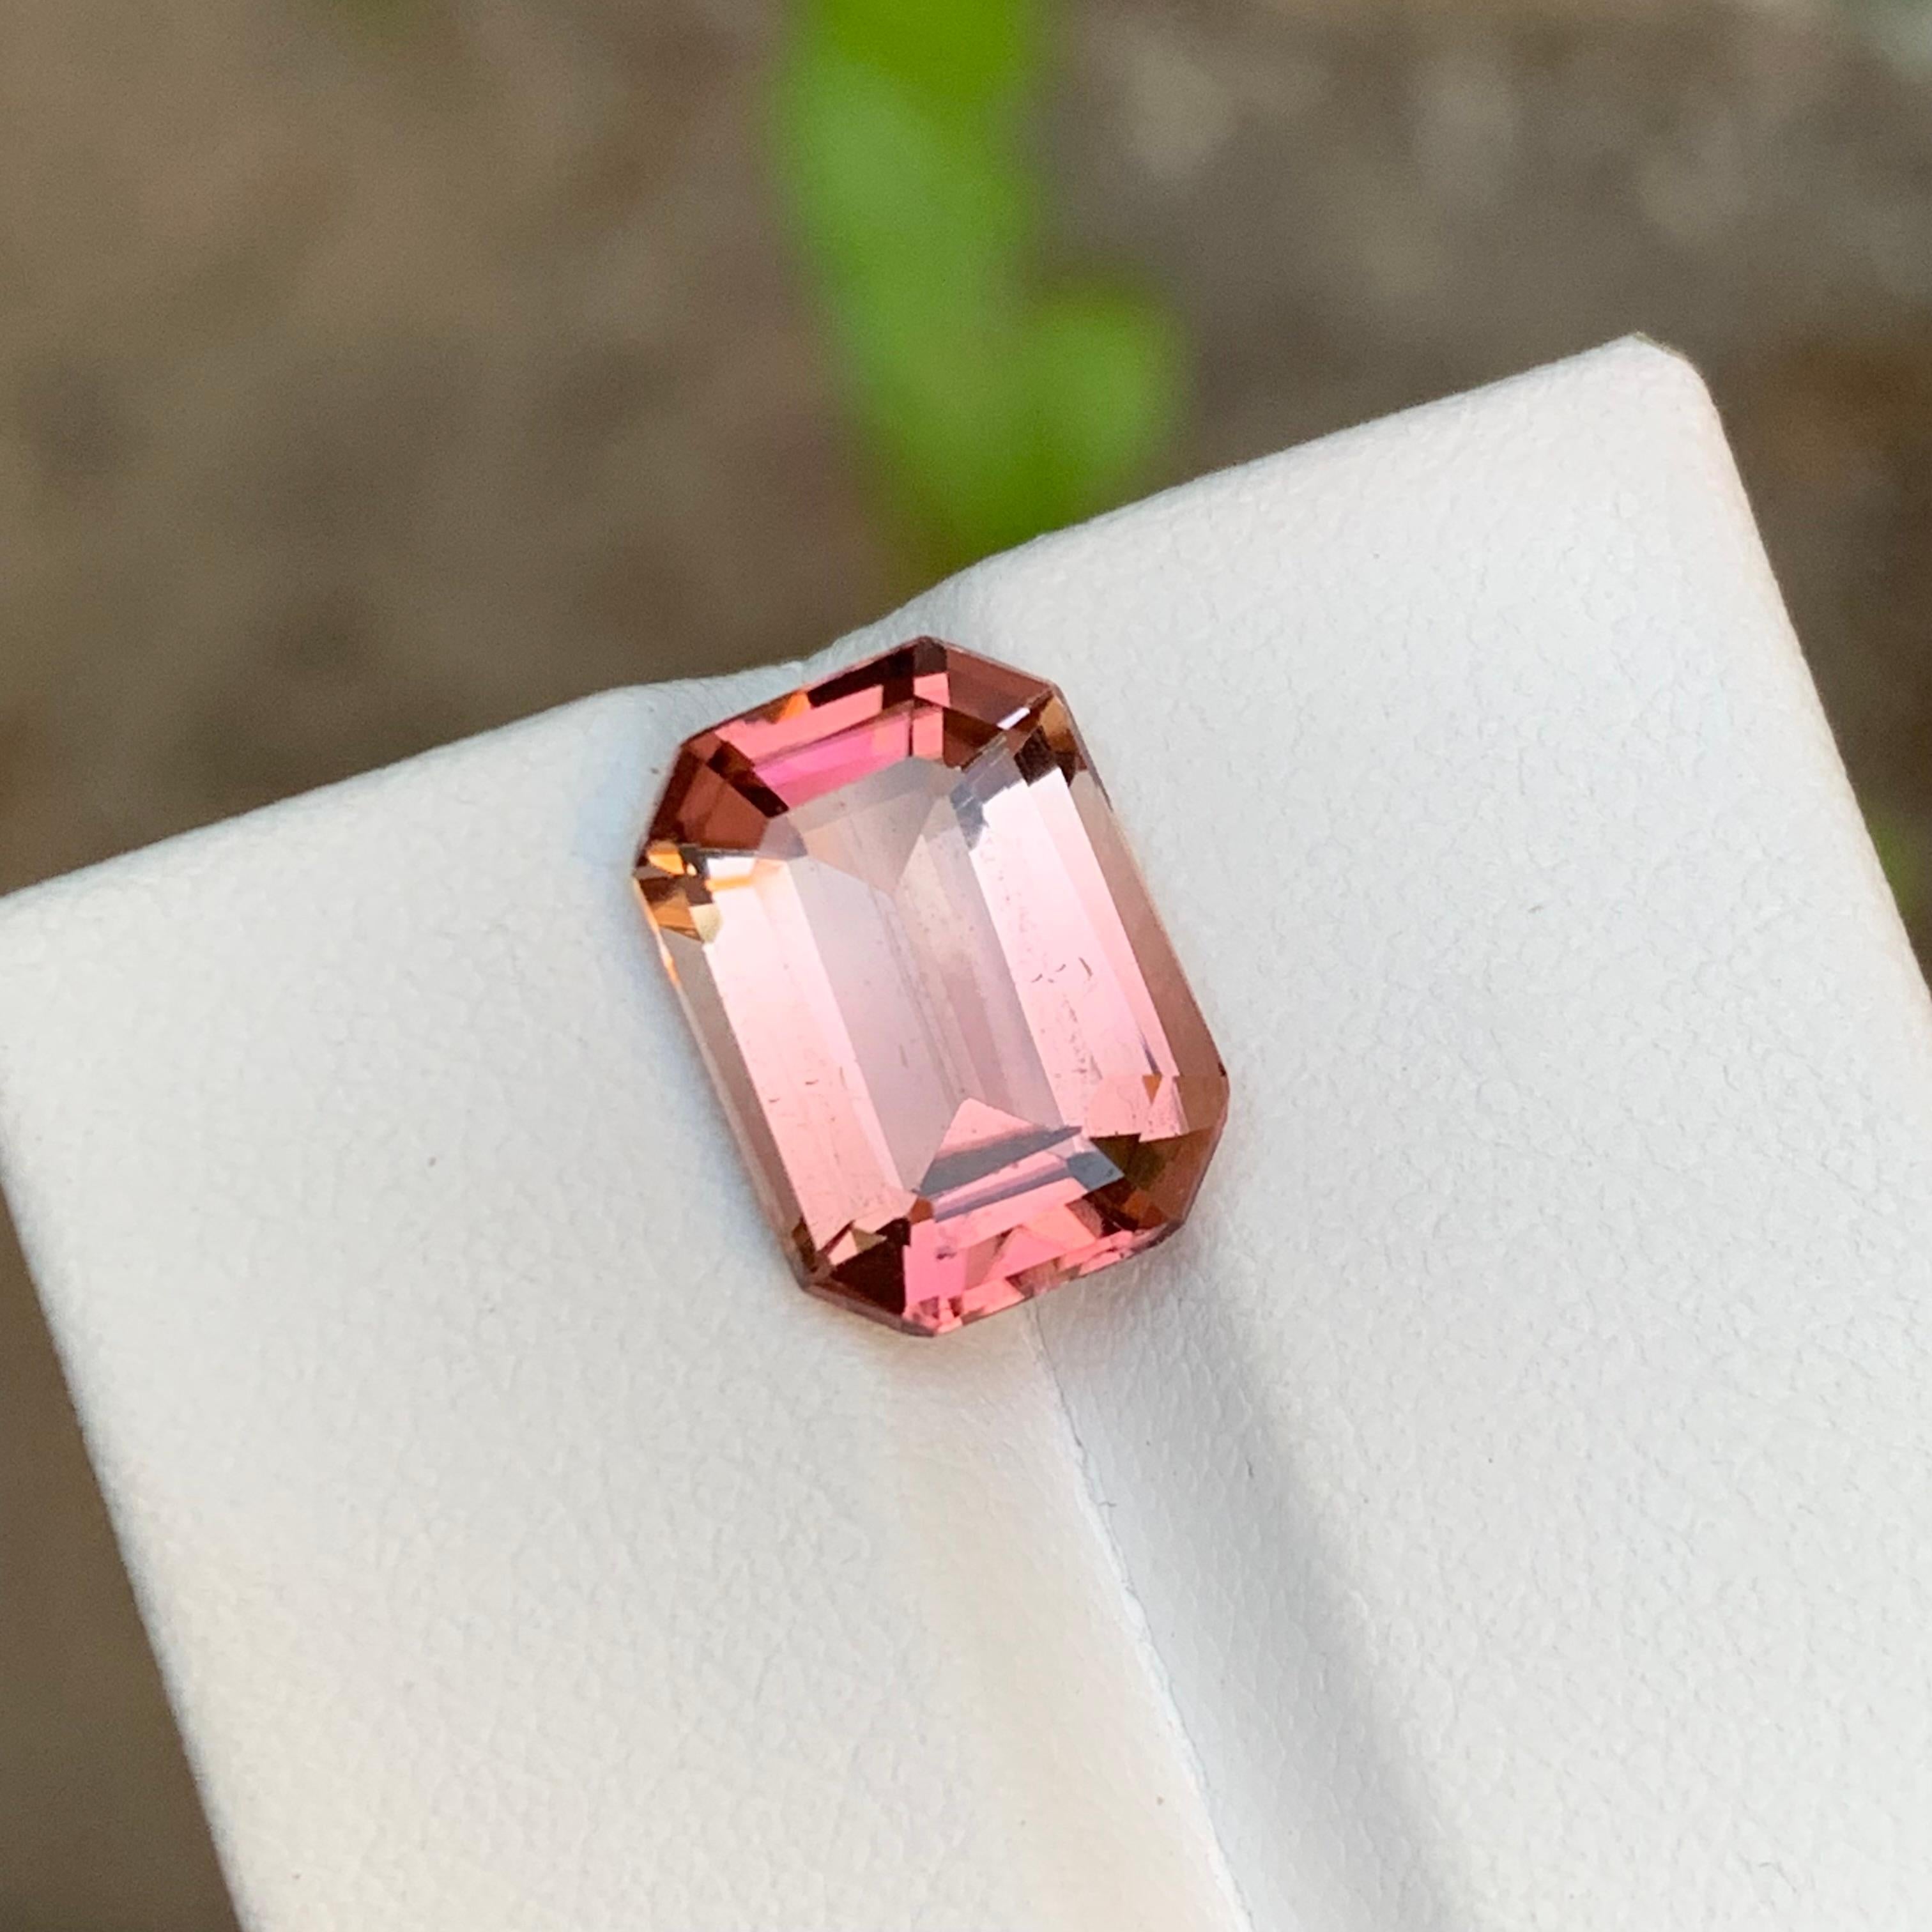 Rare Peachy Pink Bicolor Natural Tourmaline Gemstone, 4.80 Ct Emerald Cut-Ring  For Sale 2